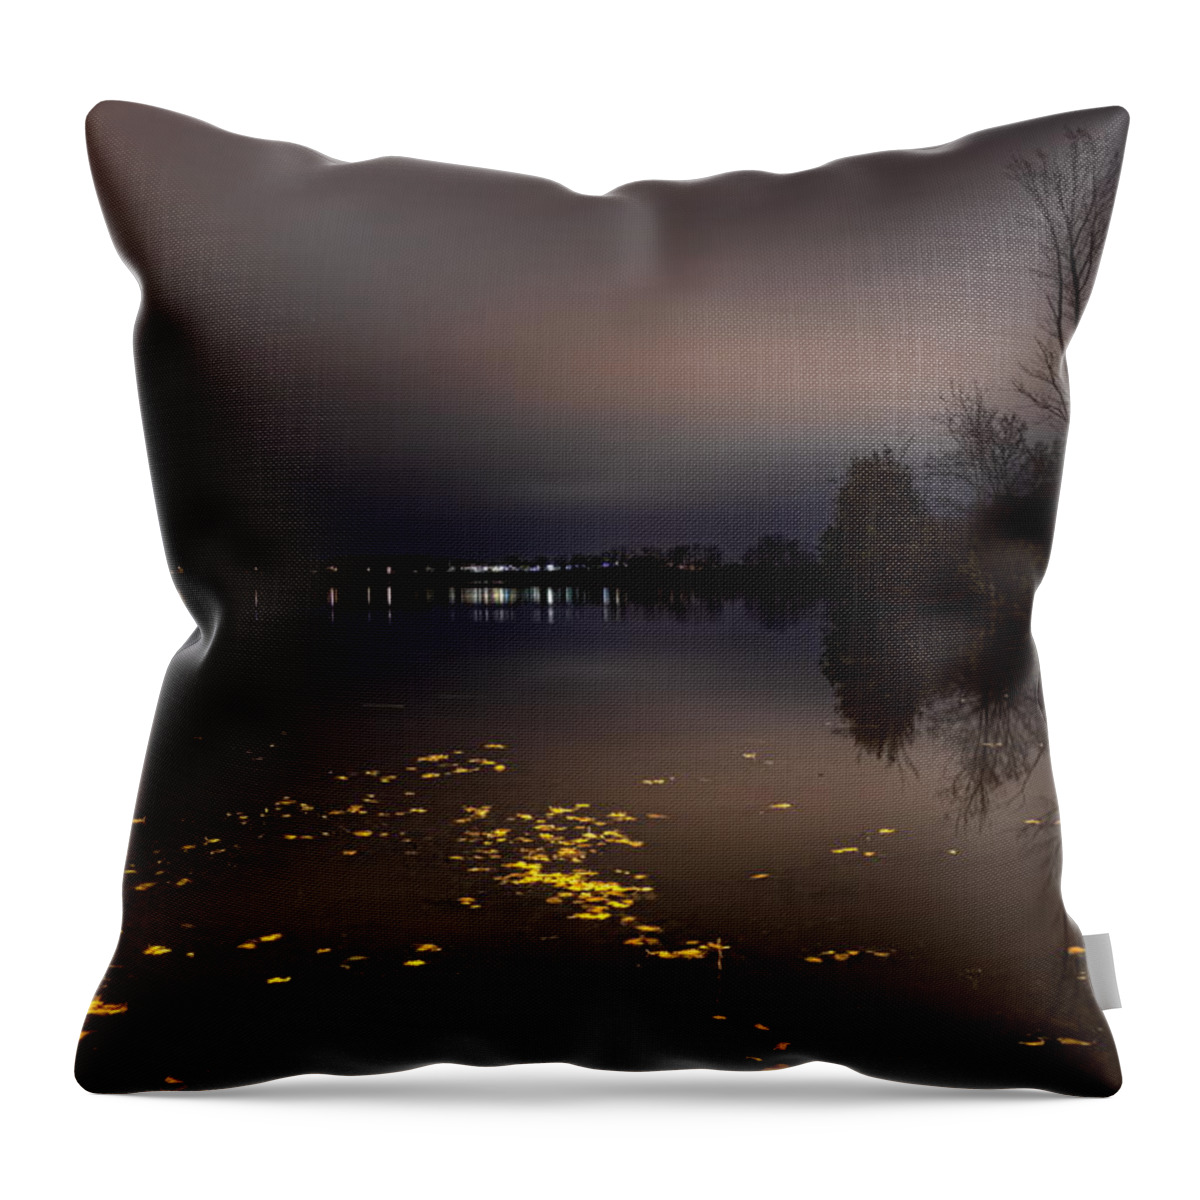 Wausau Throw Pillow featuring the photograph Golden Leaves On Lake Wausau by Dale Kauzlaric